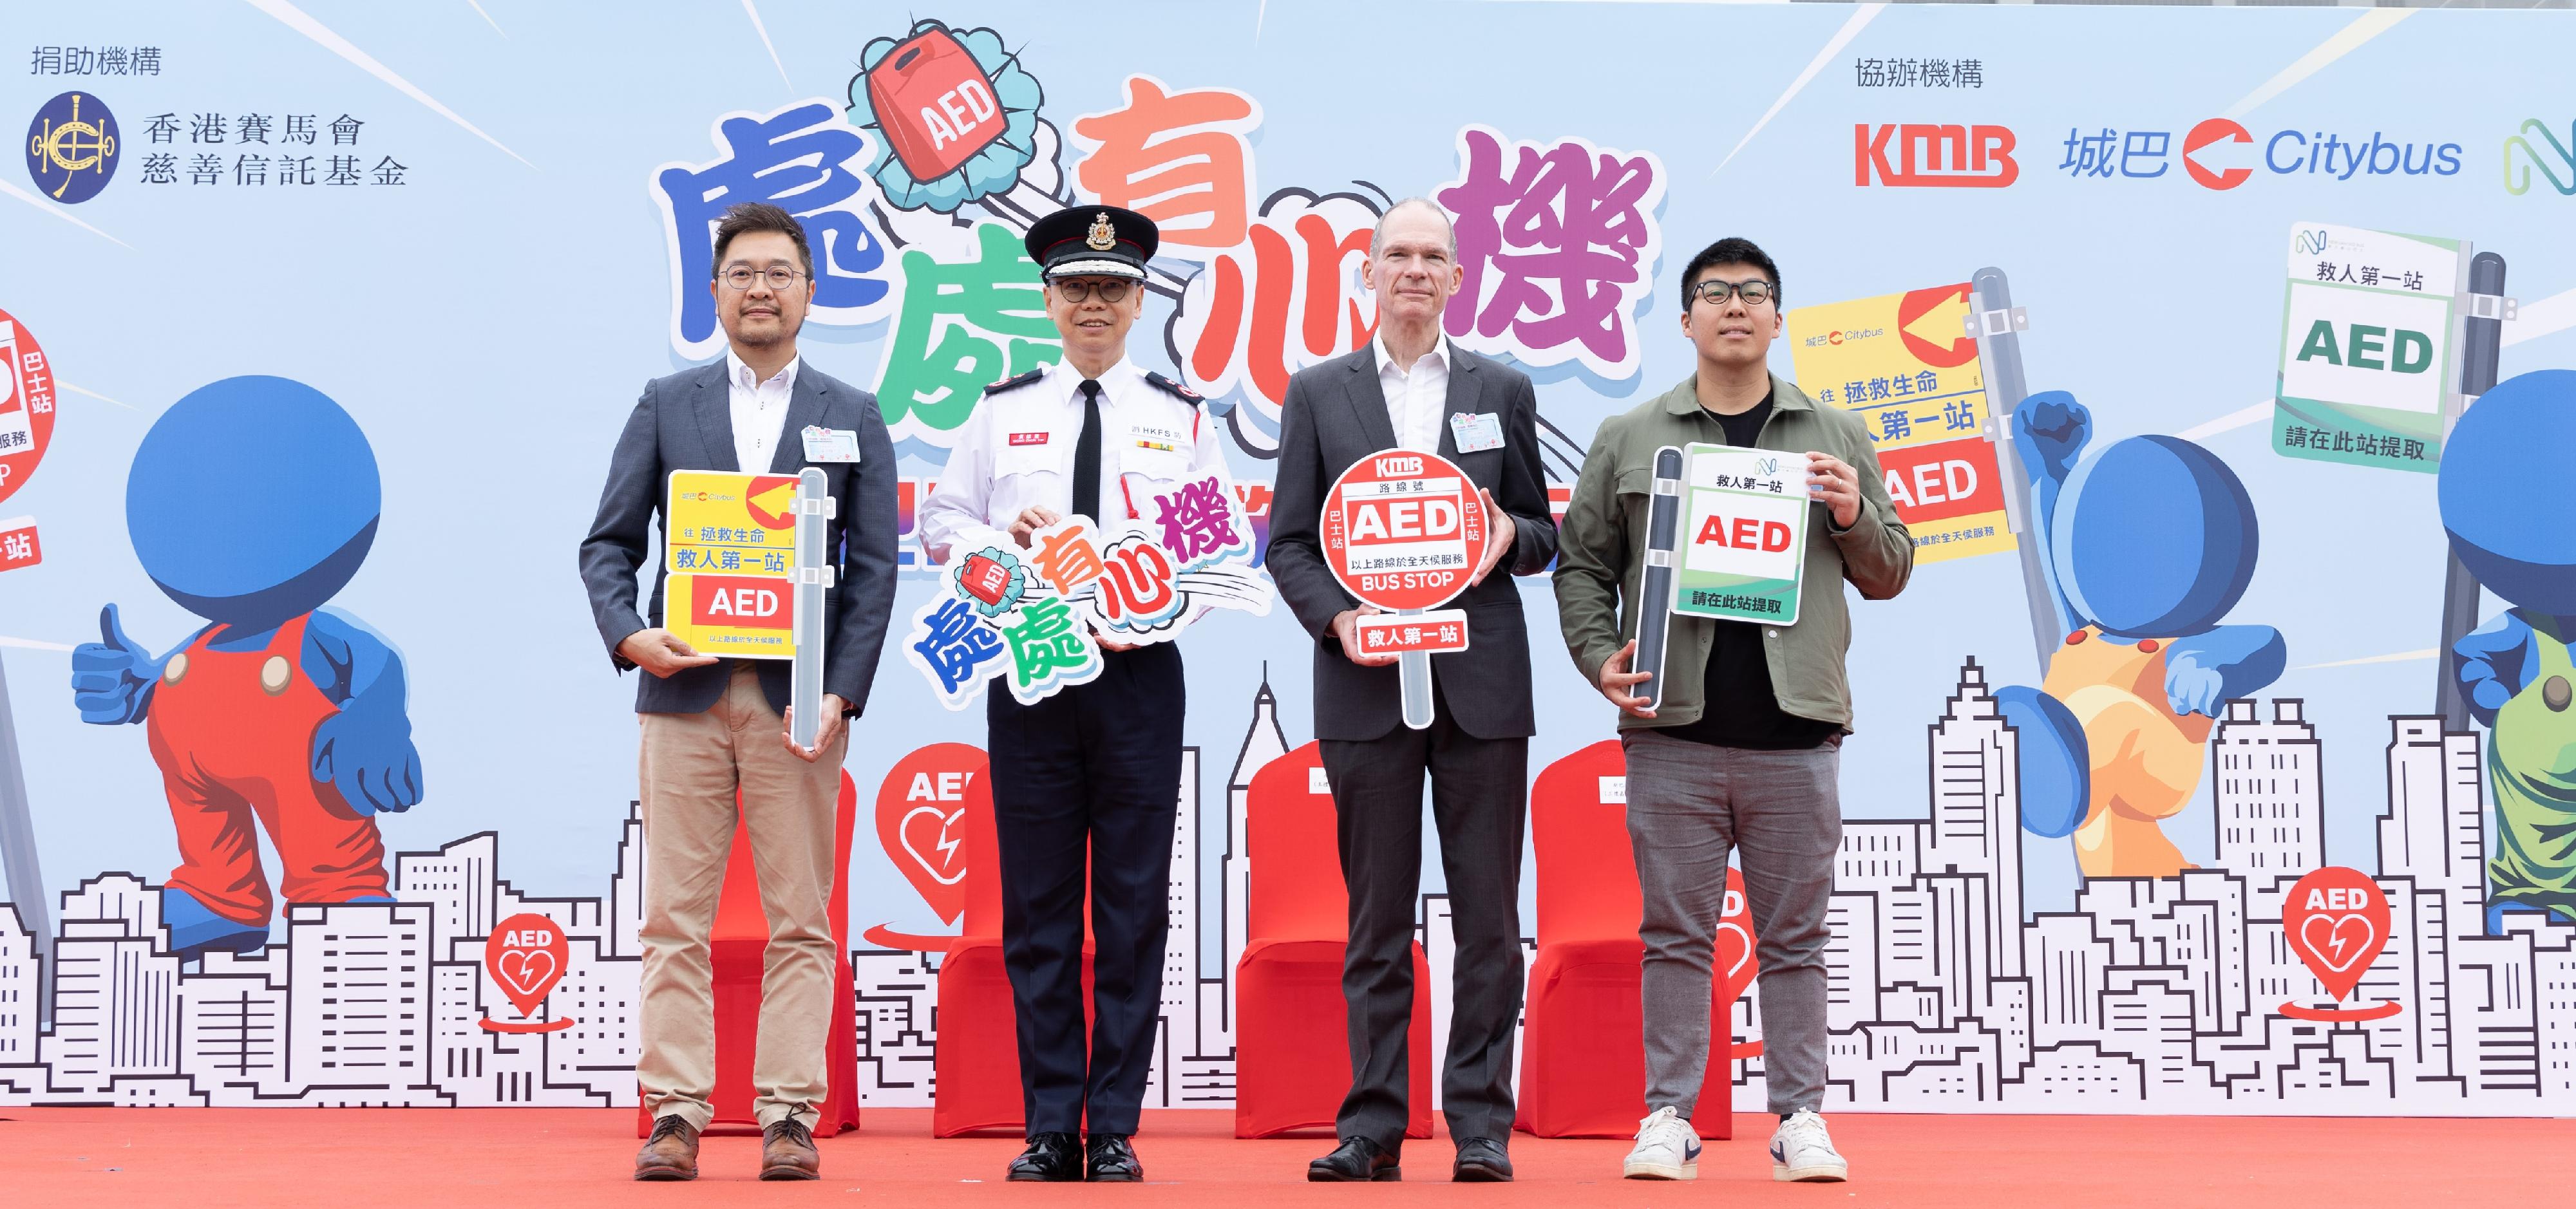 The Fire Services Department today (February 24) organised the AED Everywhere - Bus Companies United to Save Hearts event at the Fire and Ambulance Services Academy in Tseung Kwan O, appealing to all sectors of the community to install more automated external defibrillators. Photo shows the Deputy Director of Fire Services (Operations), Mr Angus Wong (second left), officiating at the launching ceremony with representatives of the bus companies.